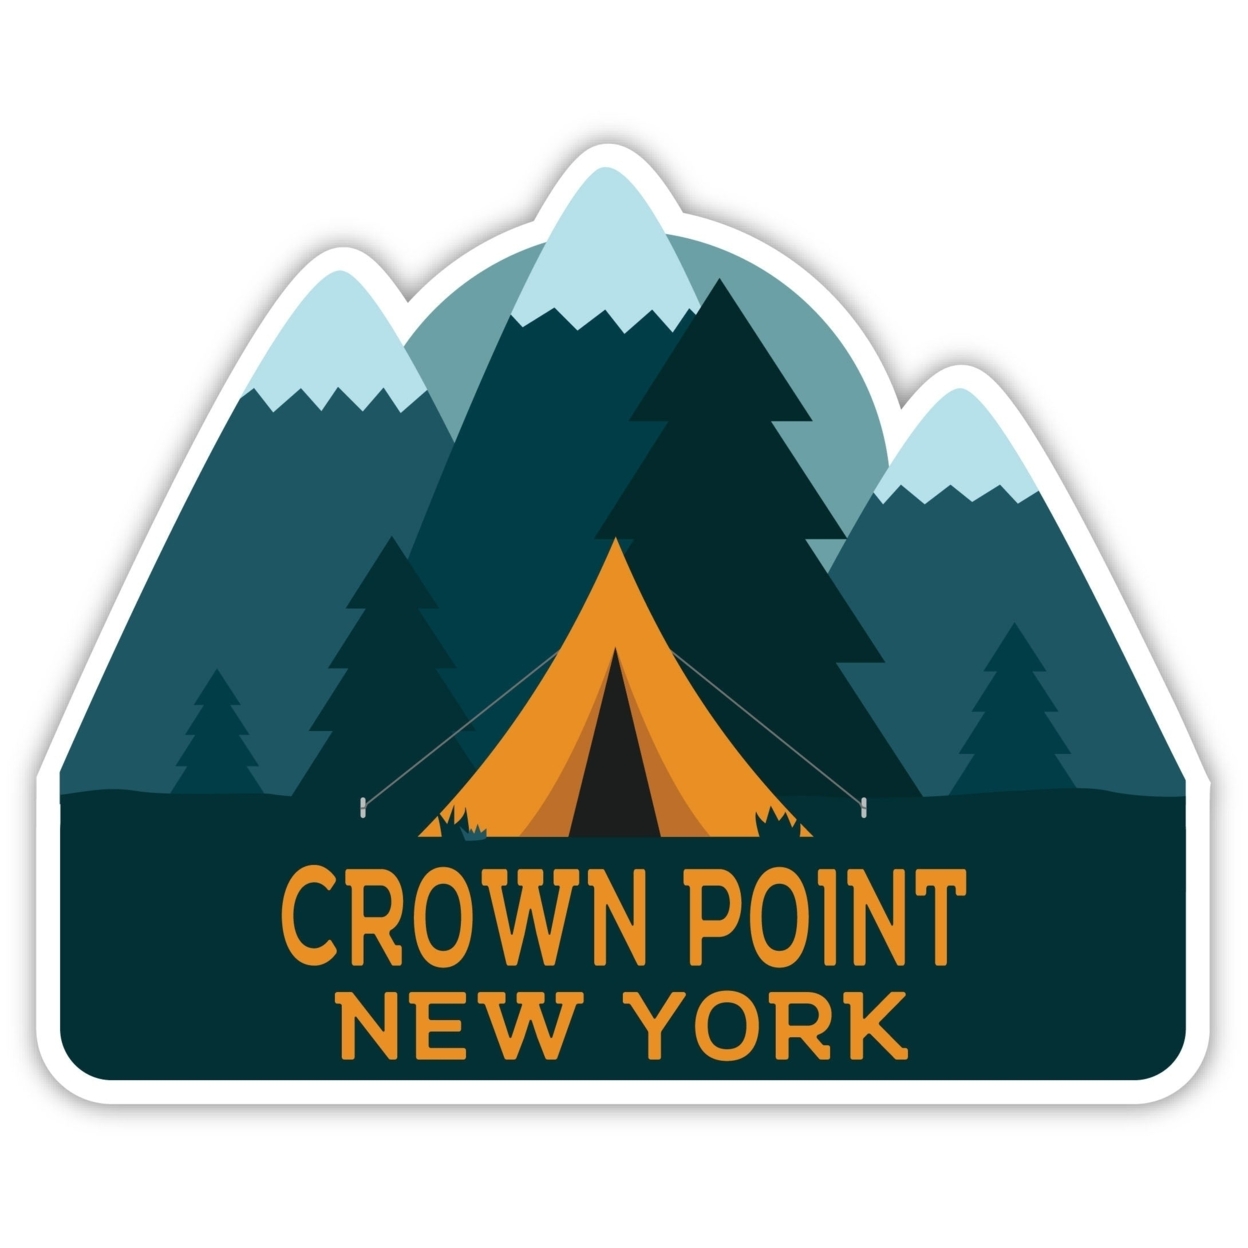 Crown Point New York Souvenir Decorative Stickers (Choose Theme And Size) - 4-Pack, 4-Inch, Tent